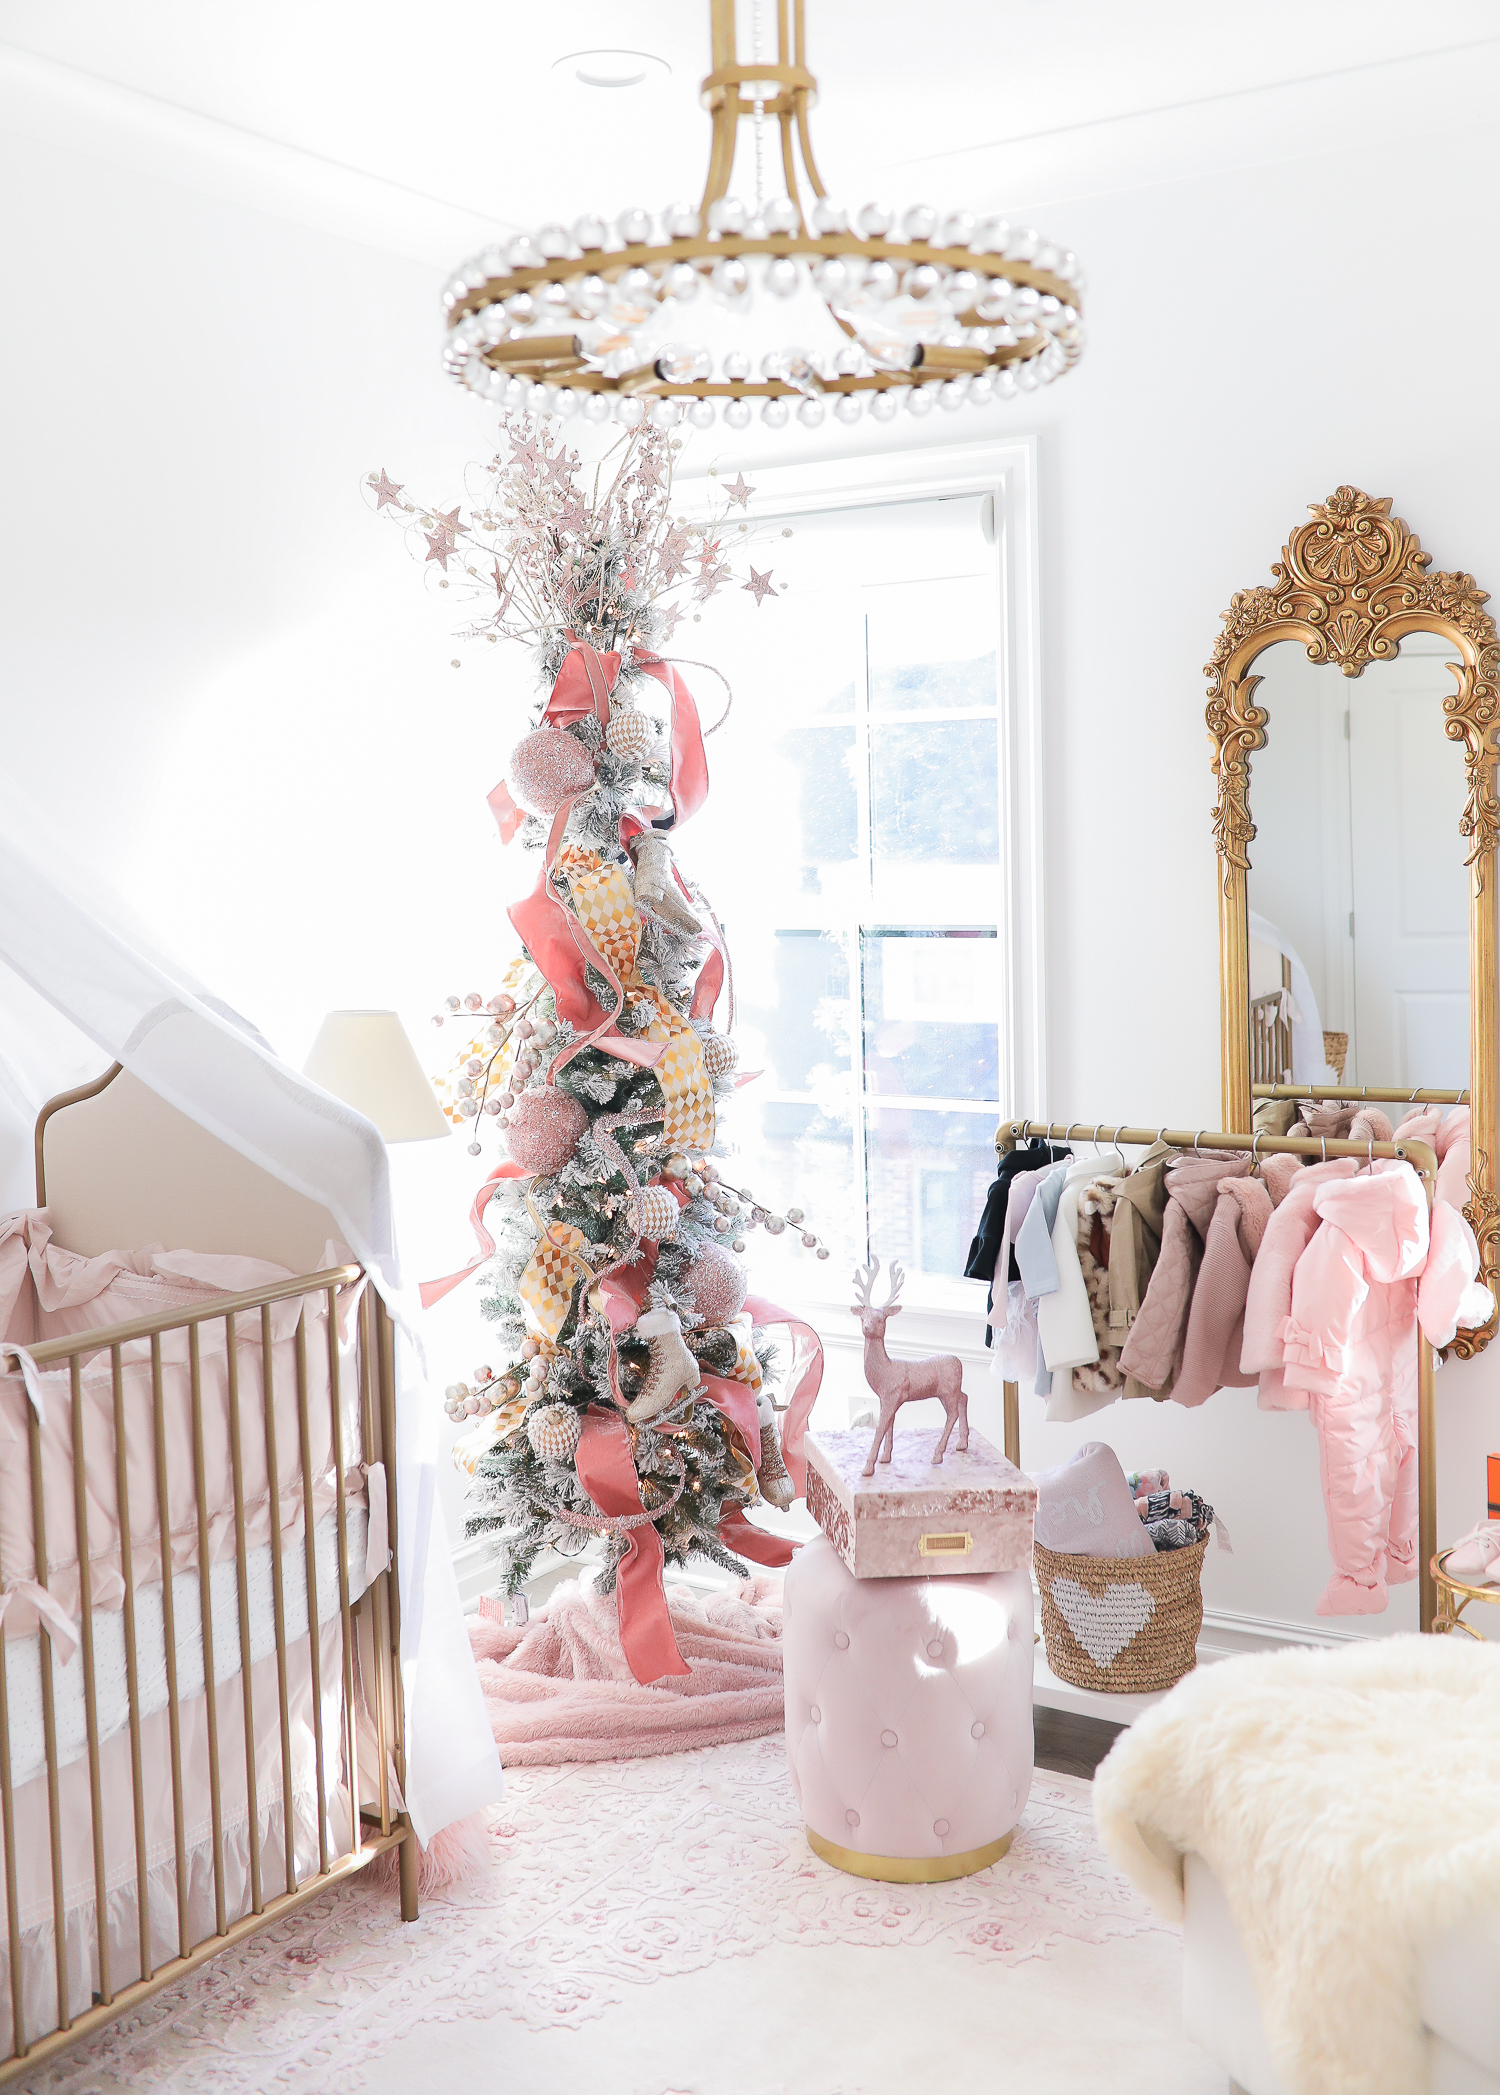 baby girl nursery inspiration christmas pinterest, baby girl nursery christmas tree, emily gemma, gold baby garment rack, the sweetest thing blog-2 | Sophia’s Baby Girl Nursery at Christmastime by popular Oklahoma life and style blog, The Sweetest Thing: image of a girl nursery decorated with a Nordstrom Nolene Sequin Party Dress, Pottery Barn Kids Merced Glider & Ottoman, Wayfair Piper 2-in-1 Convertible Crib, RH Baby & Child NEW RUFFLE APPLIQUÉD ORGANIC VOILE NURSERY BEDDING COLLECTION, Wayfair Fontanne Oriental Pink/White Area Rug, Overstock Clover 8-light Aged Brass Chandelier, Horchow Sophia Rectangular Dressing Mirror, Etsy ShopAndisList Childrens standard rack, Pottery Barn Kids Raffia Heart Baskets, RH Baby & Child GILT DEMILUNE CANOPY BED CROWN, Walmart Holiday Time Pre-Lit Snow-Flocked Colorado Artificial Christmas Tree, 7', White Lights, Target Wondershop Glitter Deer Decorative Figurine Blush, T.J. Maxx pink velvet storage box, Wayfair Arnulfo 6 Drawer Double Dresser, Nordstrom Nursery Essential Gift Set, Nordstrom Sophie la Girafe Teething Toy, Glamboxes GLAMstand Hair Accessory Organizer, Serena & Lily Jenn Thatcher painting, Pottery Barn Kids Luxe Chamois Changing Pad, Crate & Kids Acrylic Shelf Bookcase, RH Baby and Child ANTIQUED GILT WOOD LETTER, Wayfair Luxe Solid Faux Fur Throw Pillow, Gap Toddler Cable-Knit Pom Beanie, Maisonette SteamLine Luggage *Exclusive* Vanity Case, Smocked Auctions NUTCRACKER SMOCKED BISHOP PINK GINGHAM, Nordstrom Ugg Jesse Bow Fluff Bootie, Overstock Safavieh Couture Carnation Round Tufted Ottoman, Pottery Barn Kids Blush Velvet Nursery Storage, and Nordstrom Chenille Blanket.